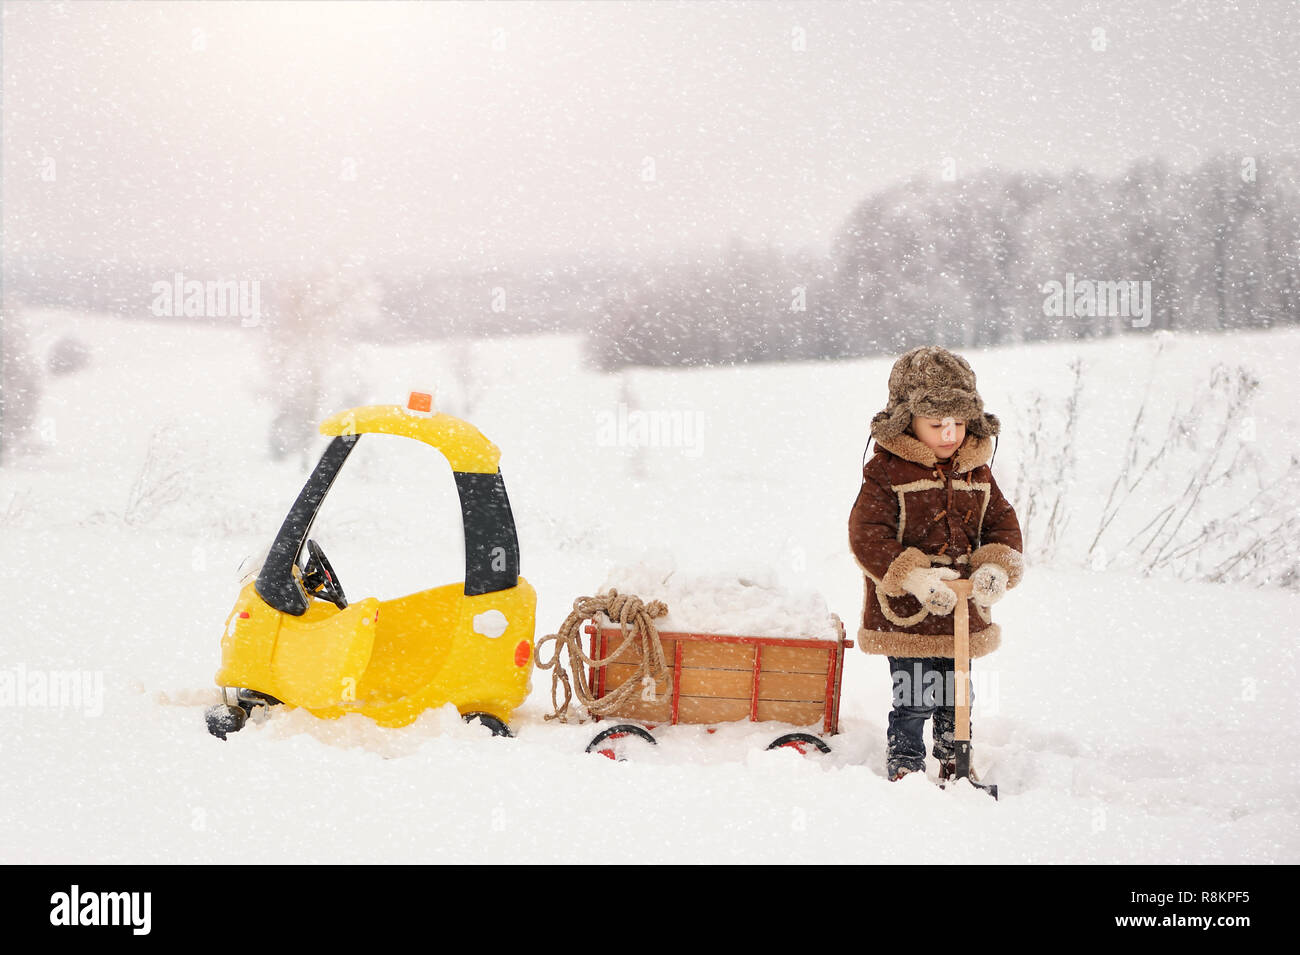 Happy little Boy in winter clothes.  The child is playing outside in the winter. A yellow toy car and a small cart filled with snow, stuck in the snow Stock Photo